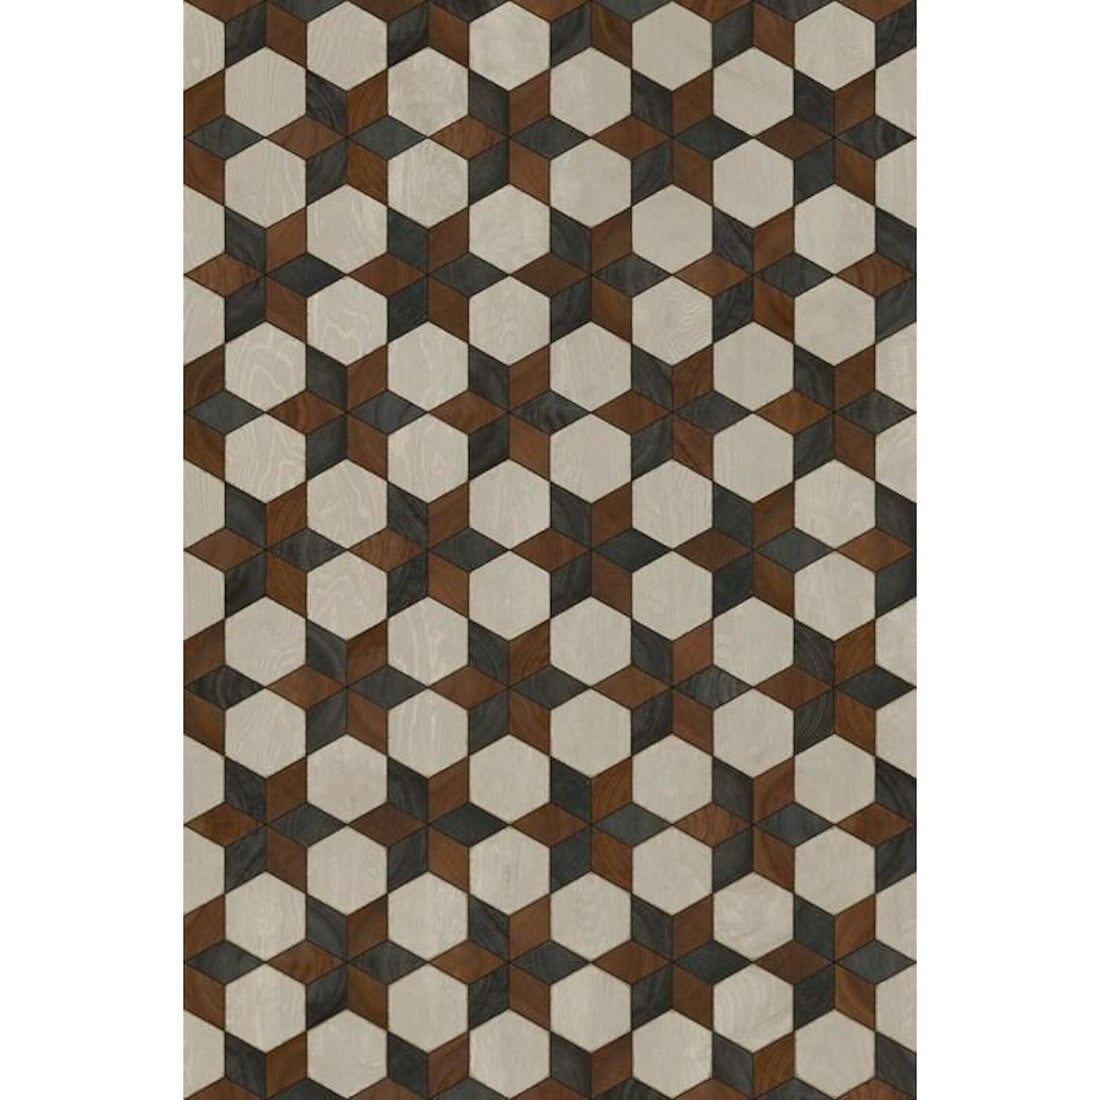 3d cube optical illusion pattern in brown and beige tones on a nonslip vintage linoleum vinyl floor cloth. --&gt; 3d cube optical illusion pattern in brown and beige tones on a nonslip Artisanry Illuminated Radio Star Vinyl Rug by Spicher and Company.